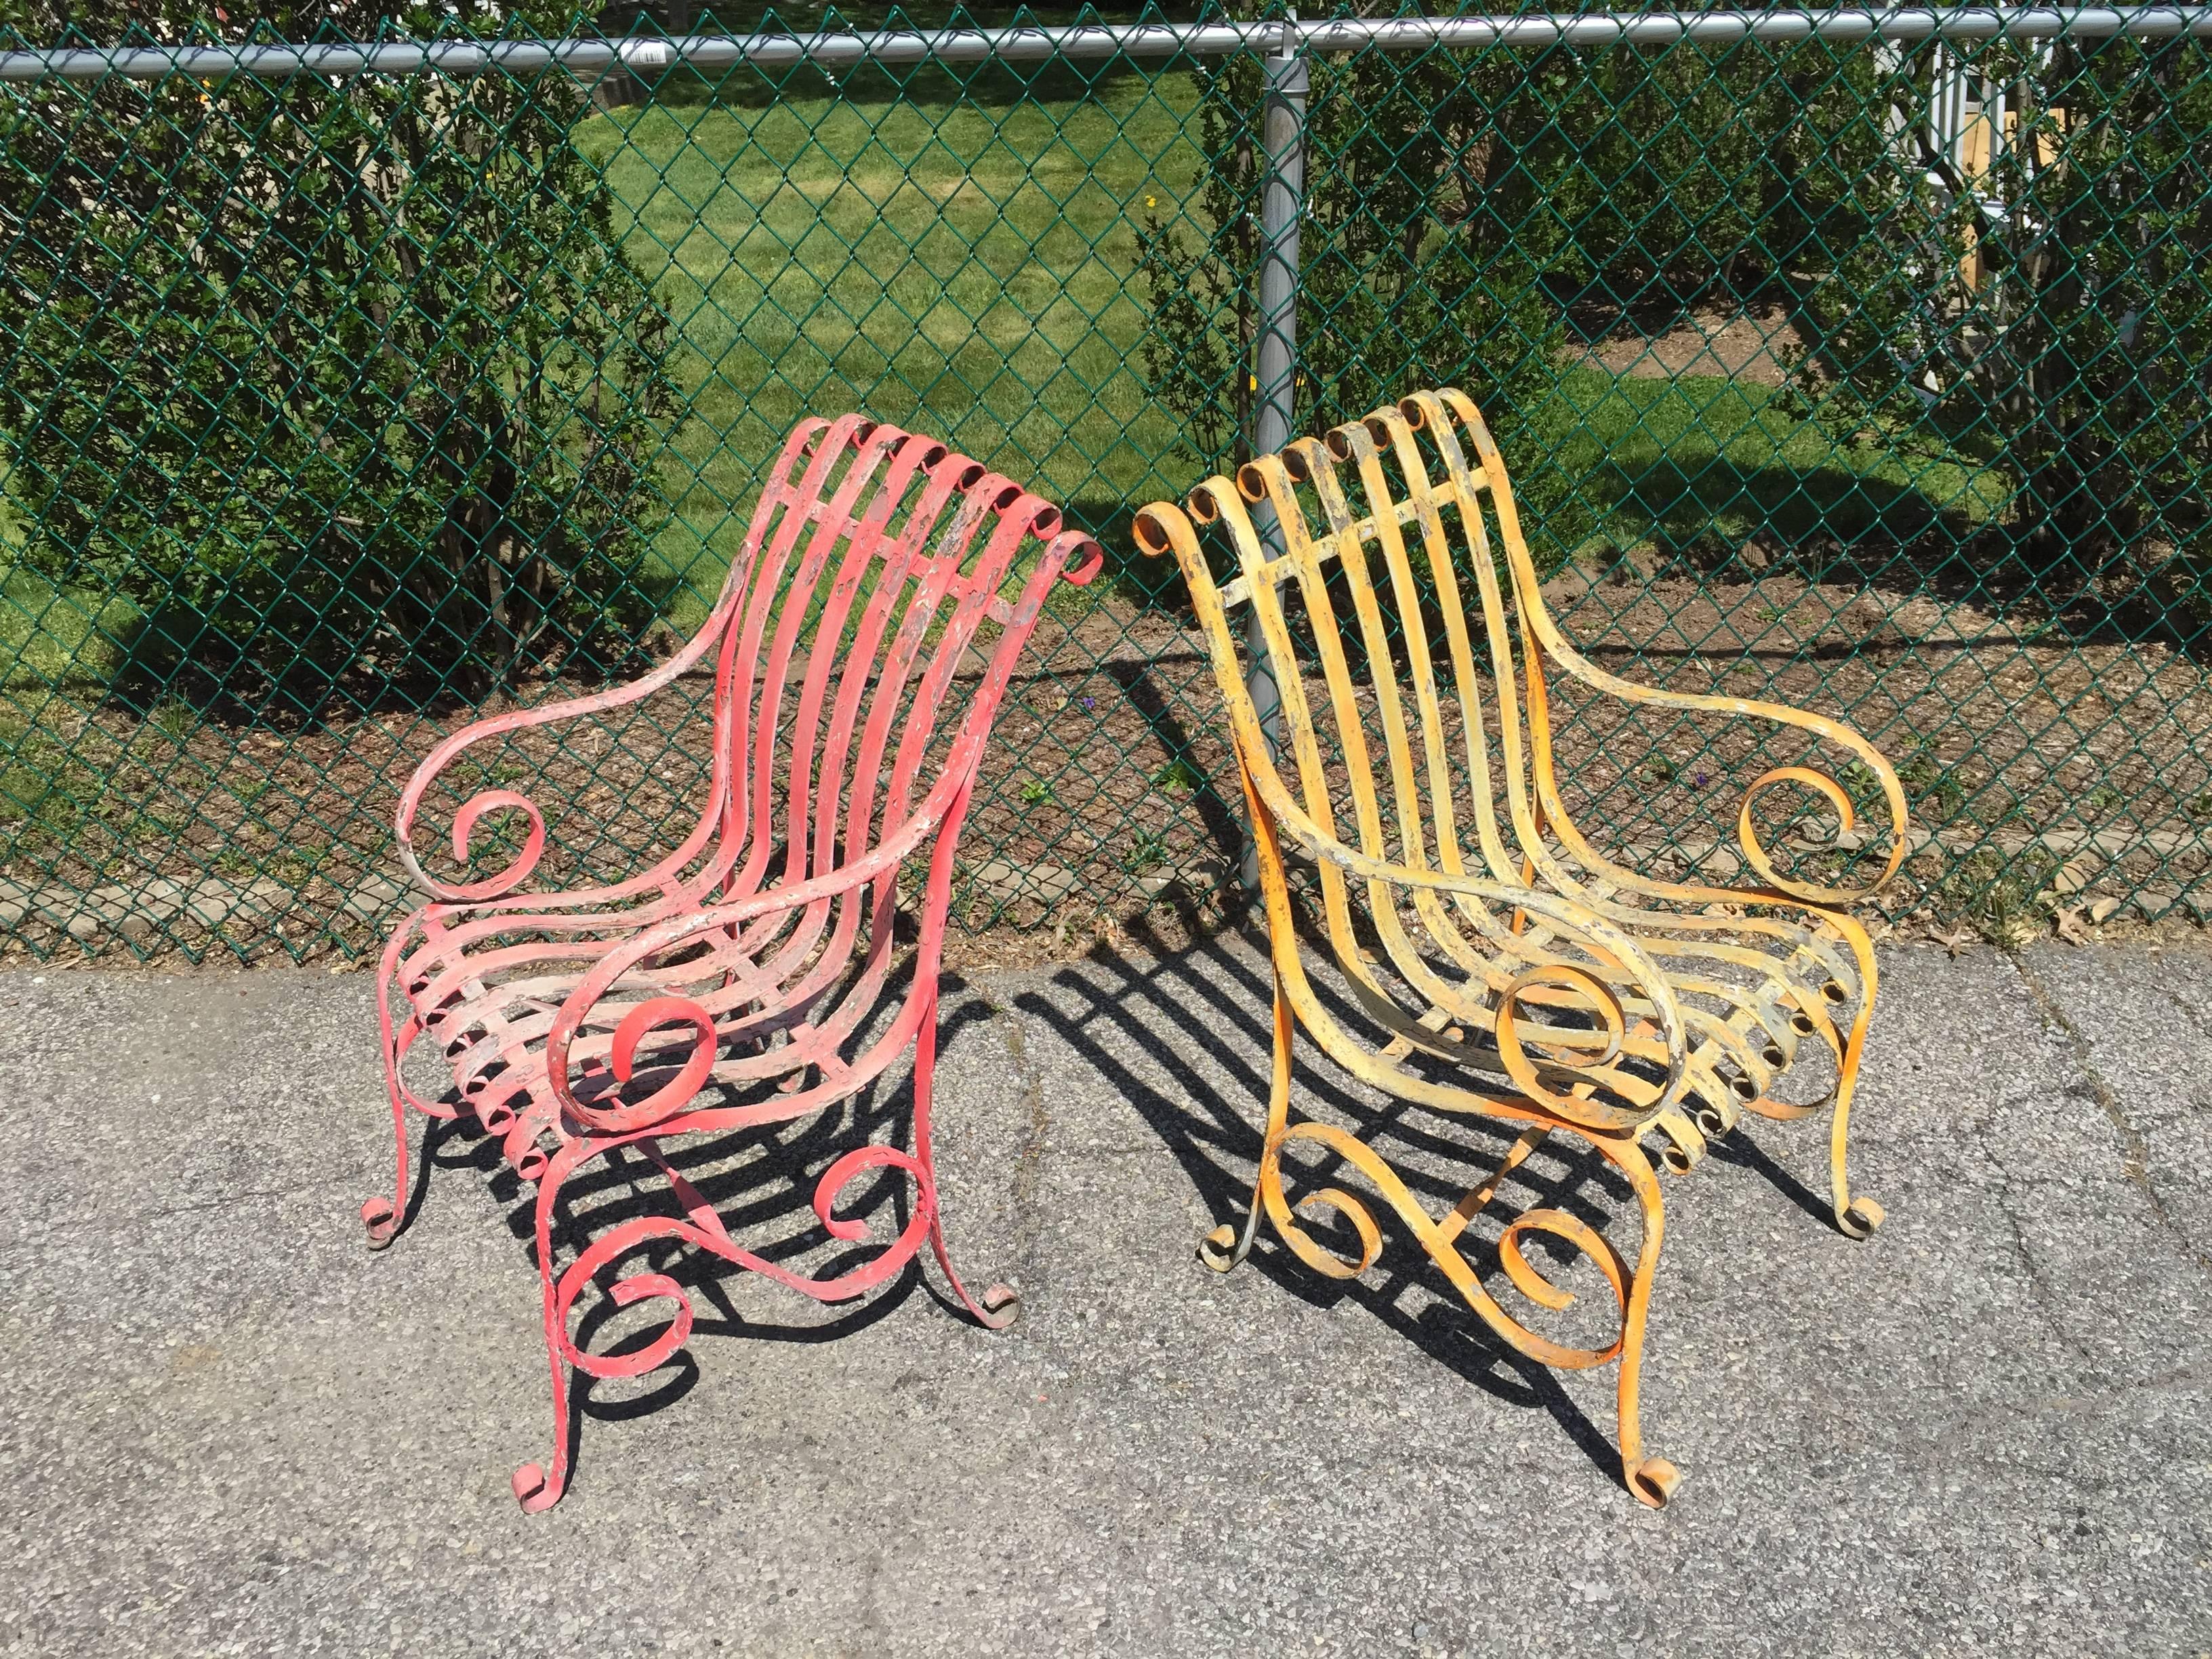 Rustic pair of garden chairs.